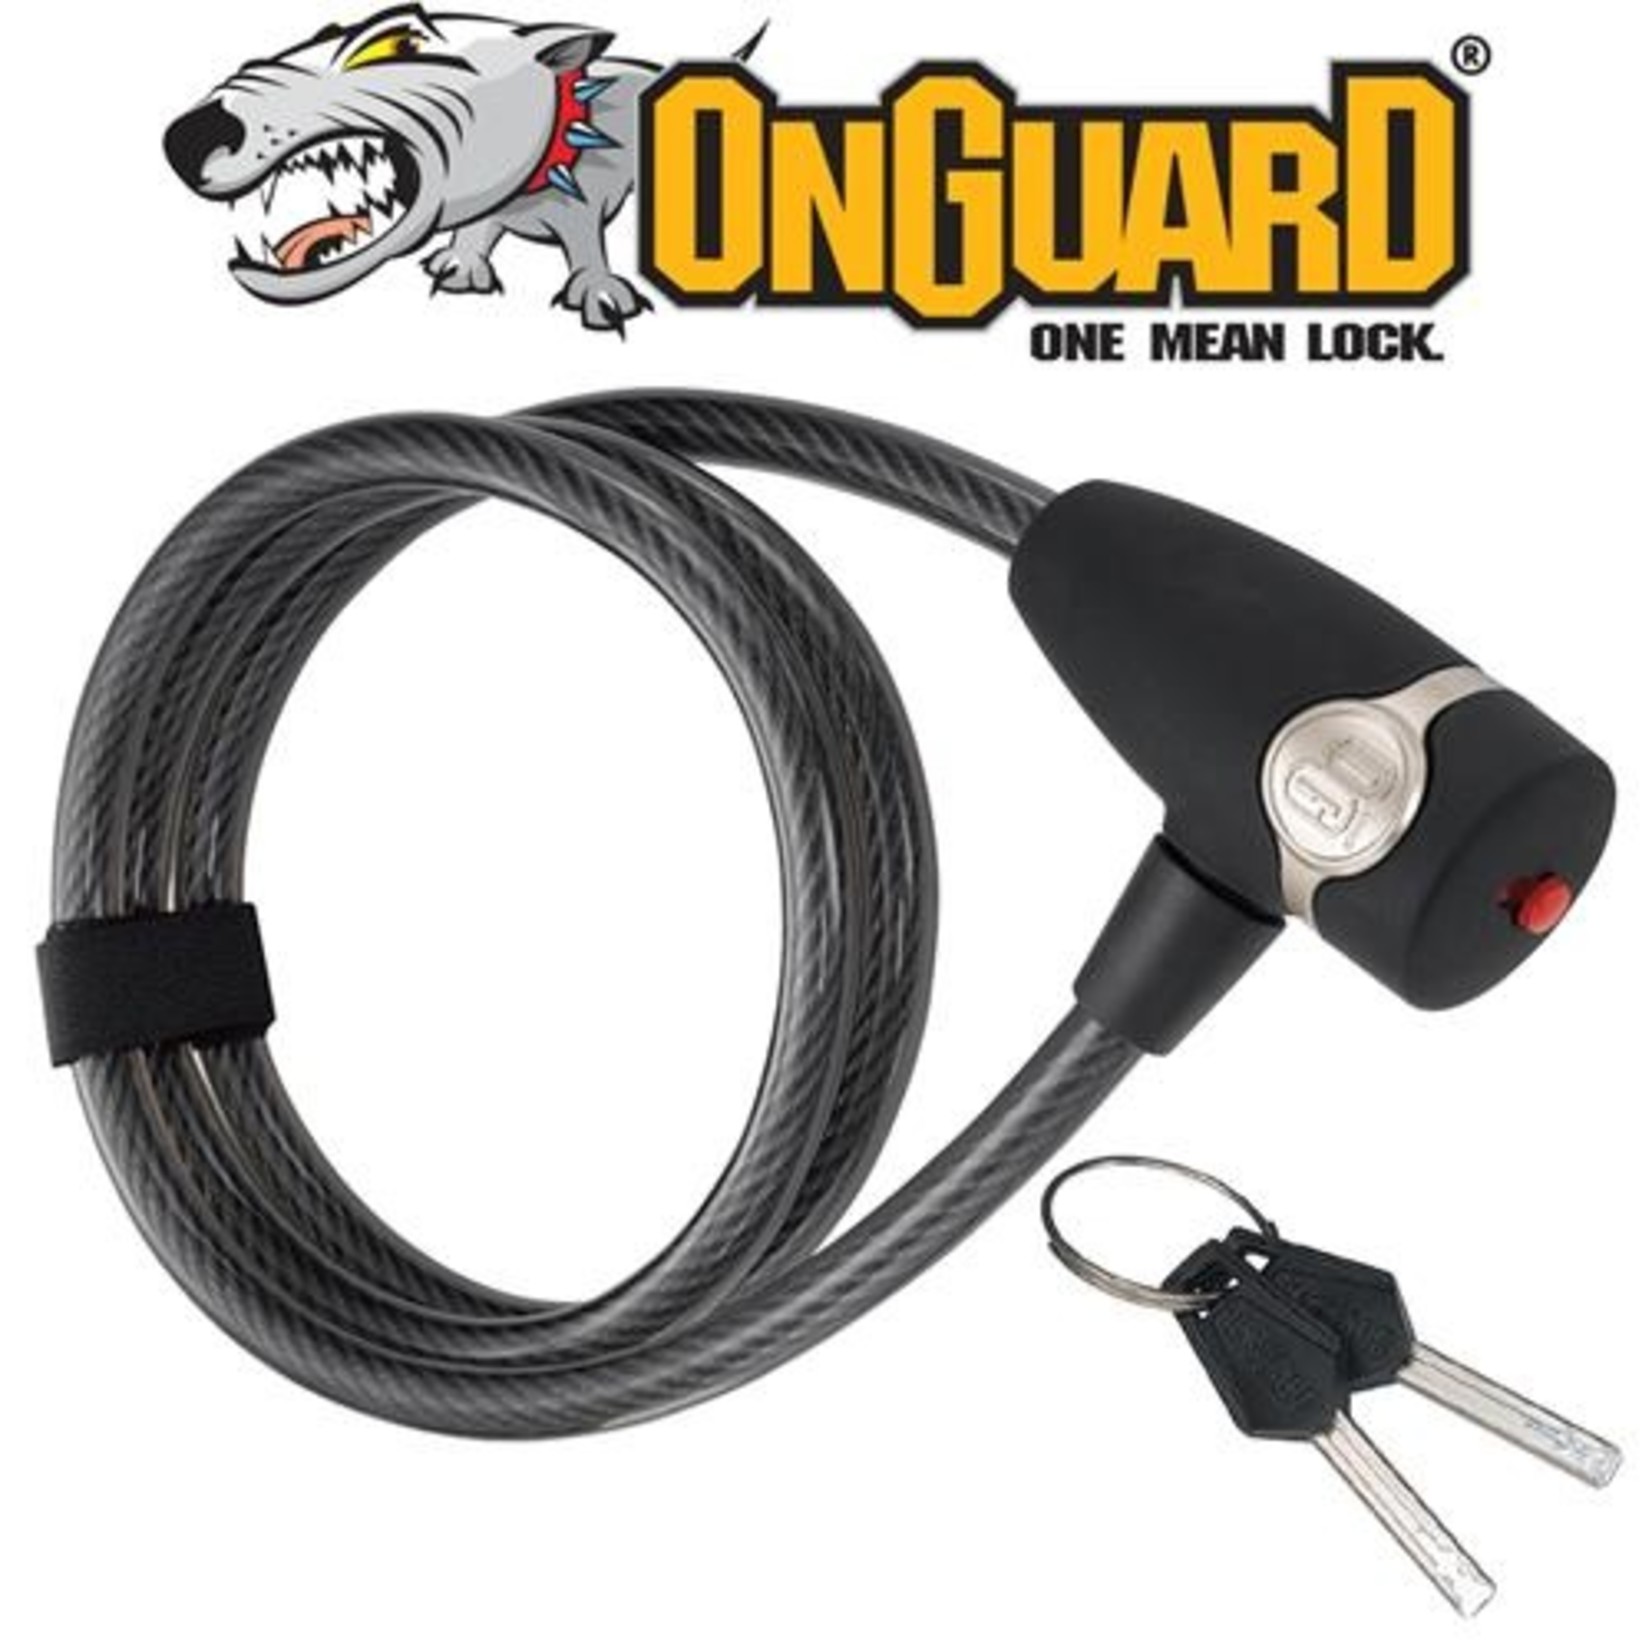 Onguard Onguard Bike/Cycling Lock - OG Series - Coiled Cable Lock Key - 120cm X 10mm